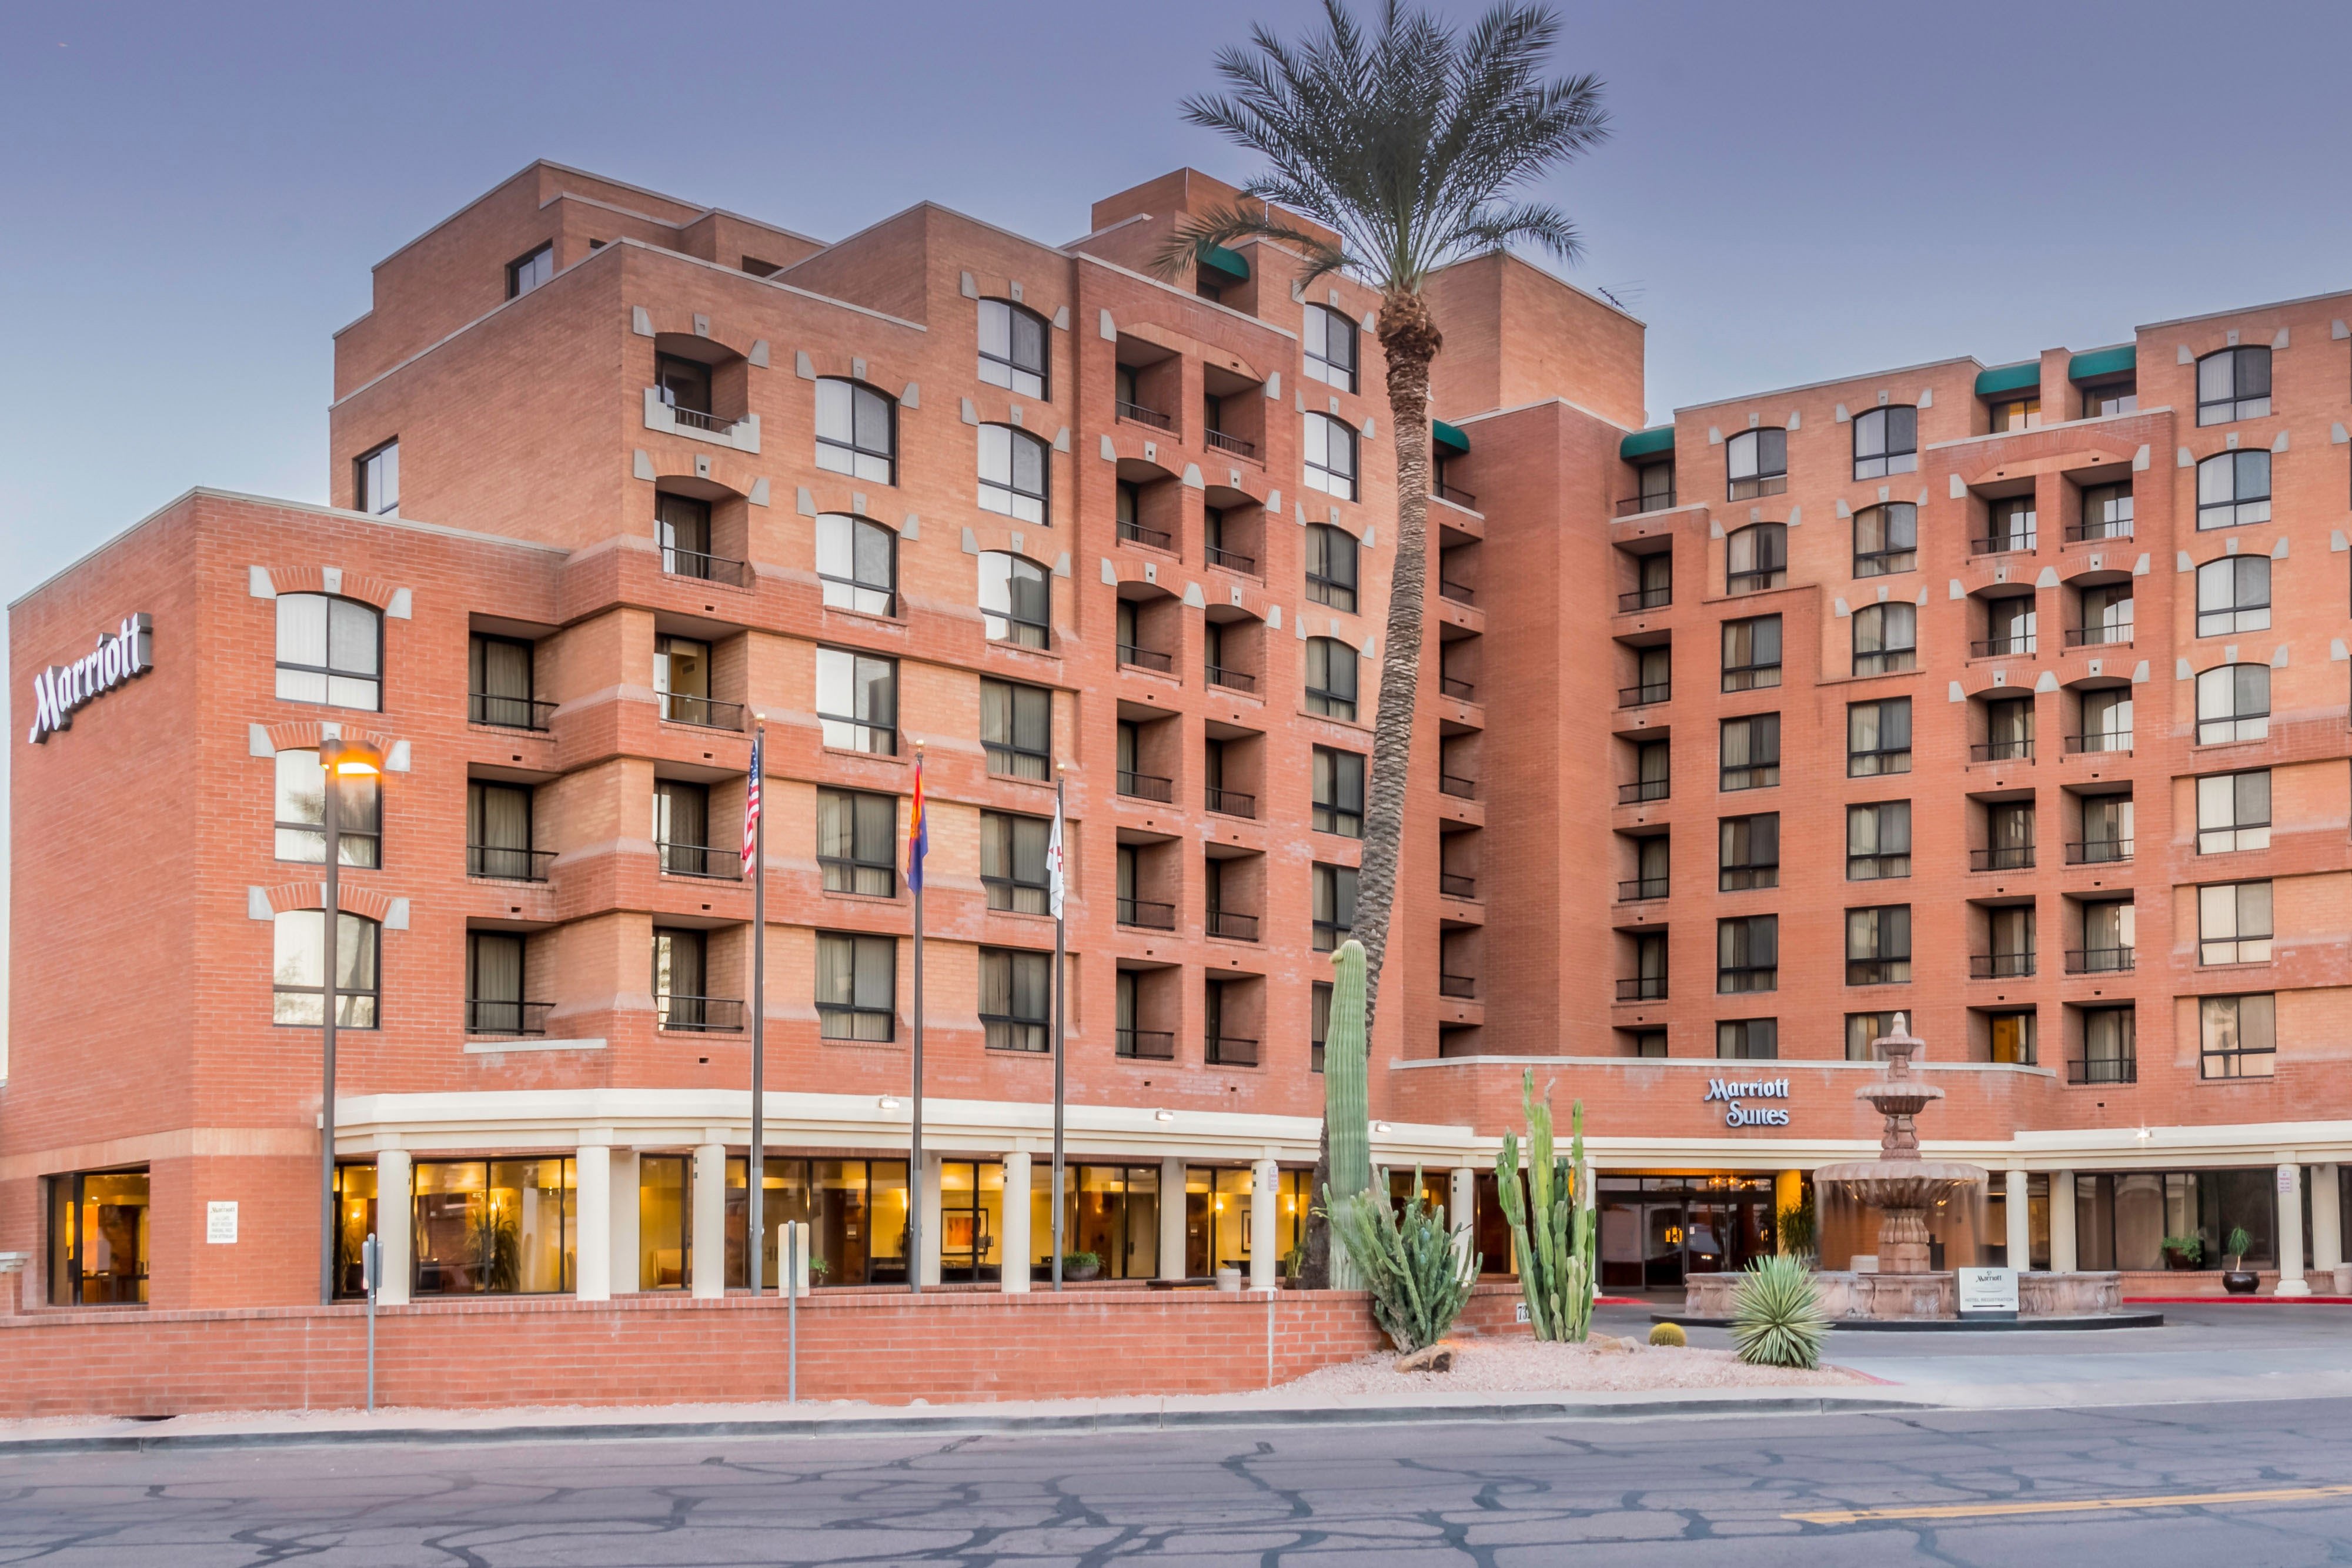 old town scottsdale hotels